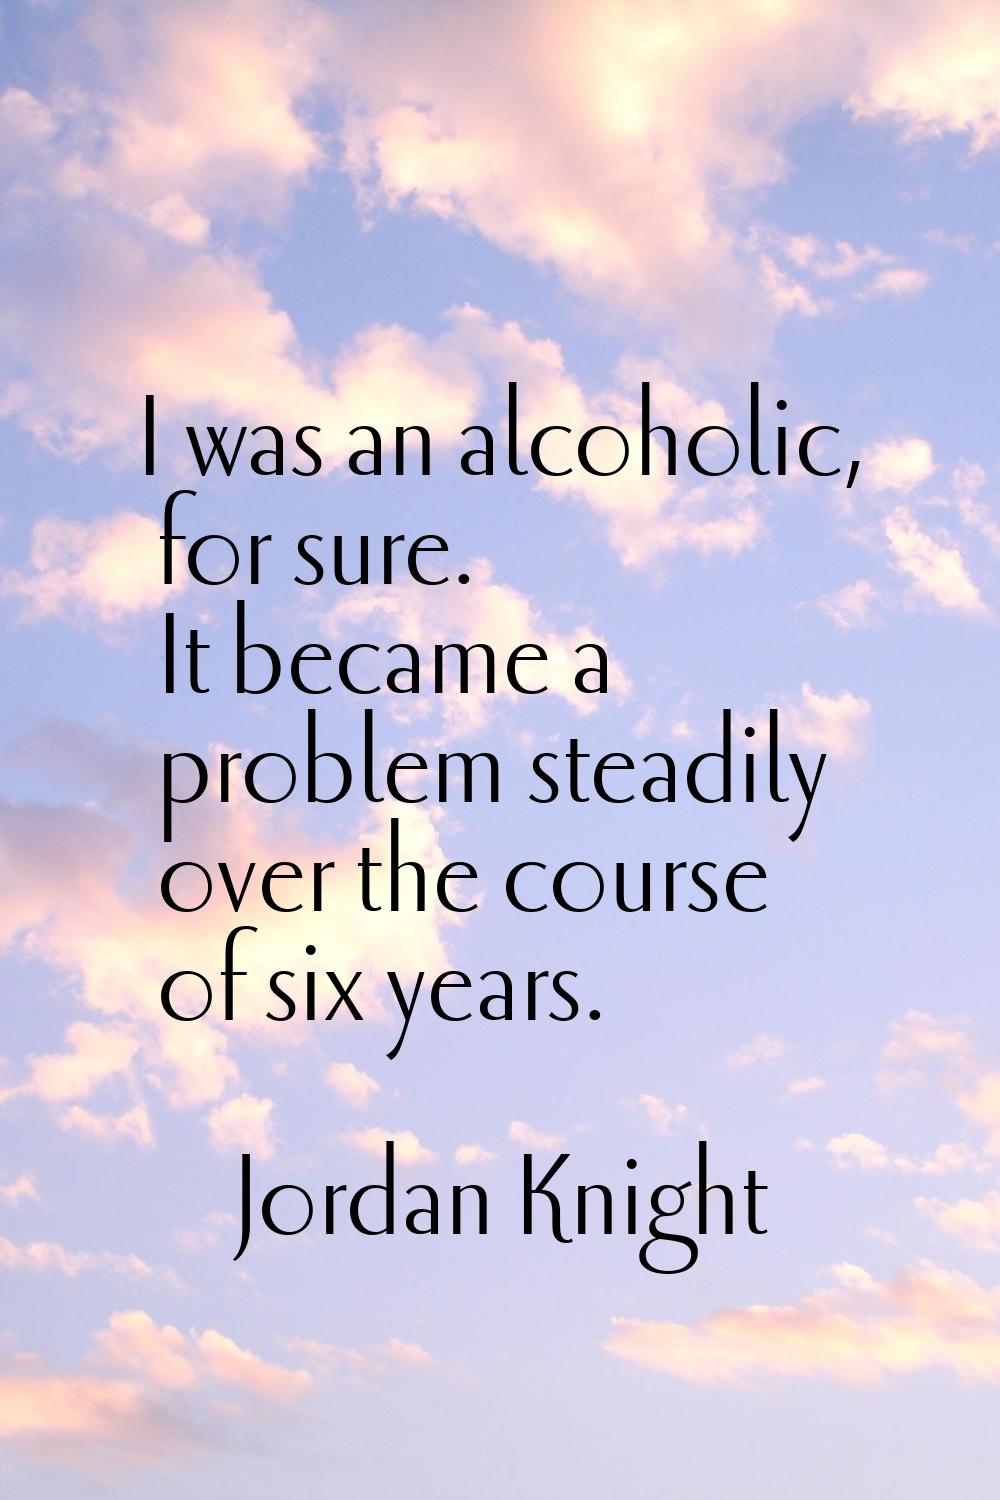 I was an alcoholic, for sure. It became a problem steadily over the course of six years.